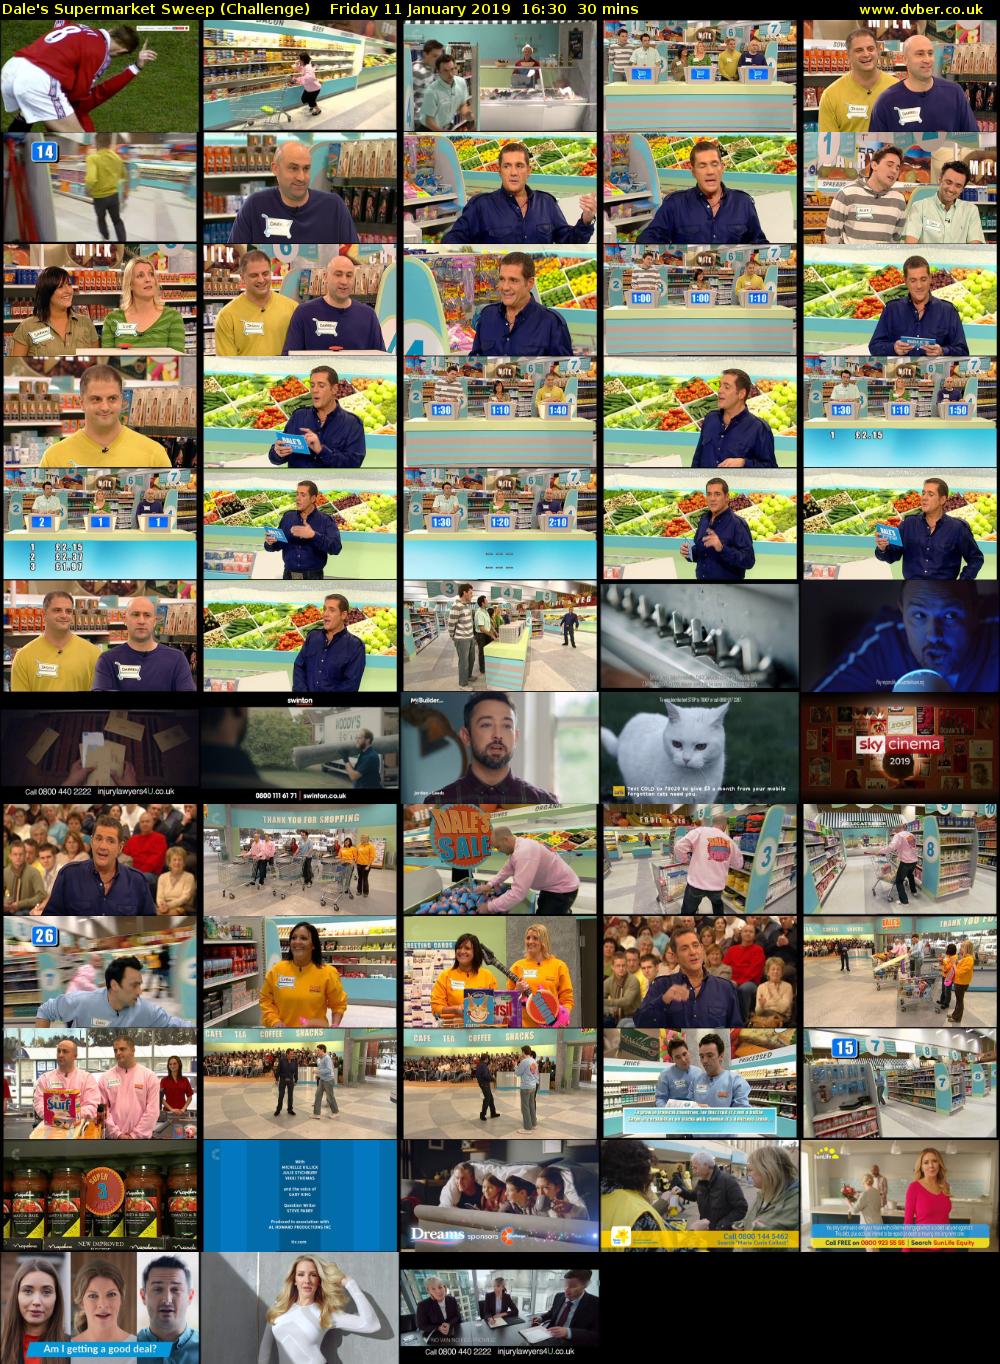 Dale's Supermarket Sweep (Challenge) Friday 11 January 2019 16:30 - 17:00